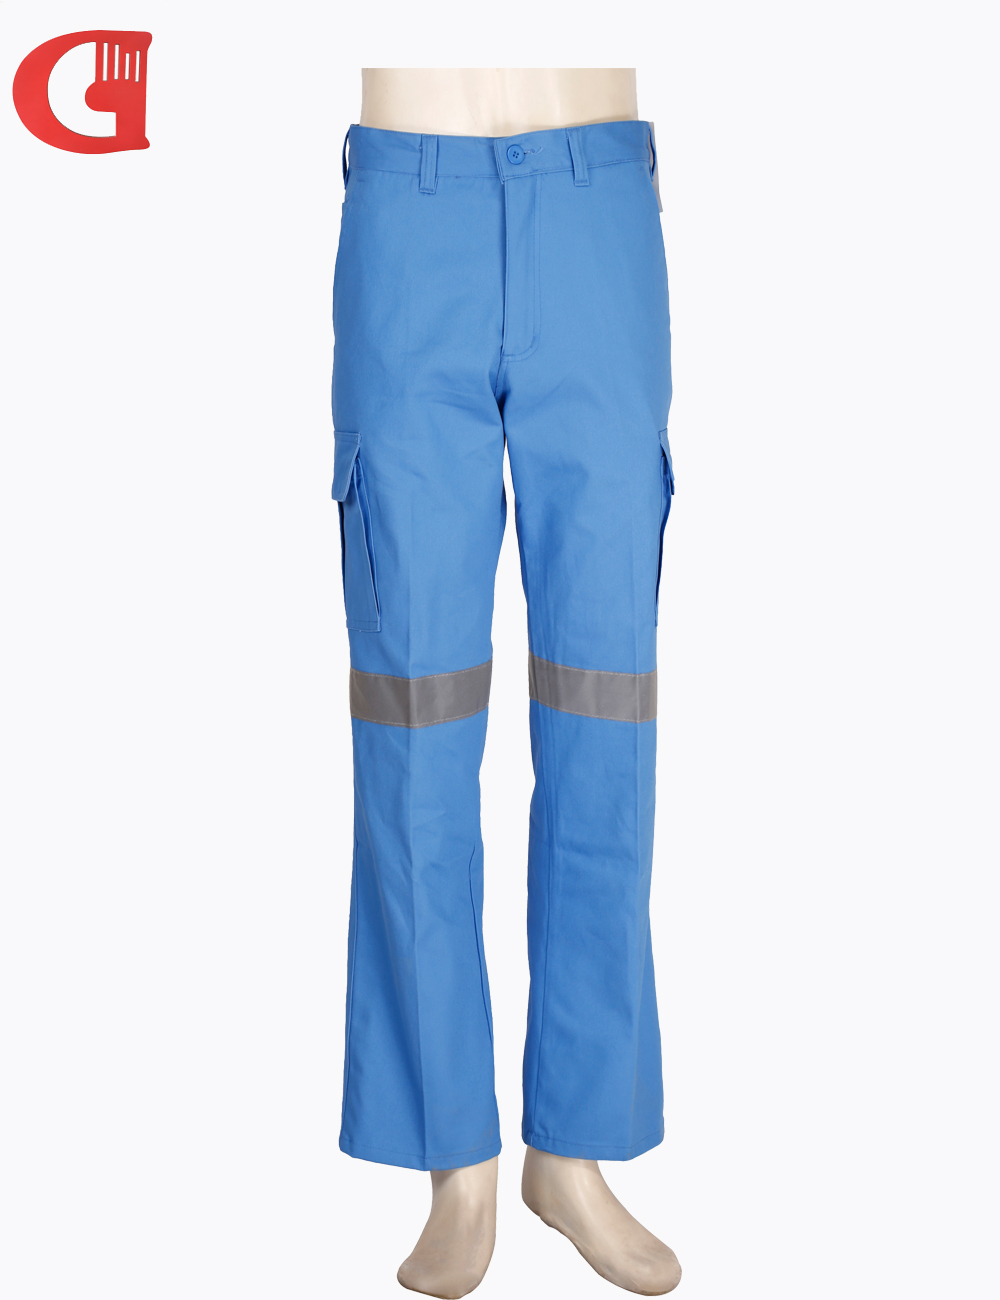 Wholesale Cargo Work Pants with tape China Manufactures Work Trousers